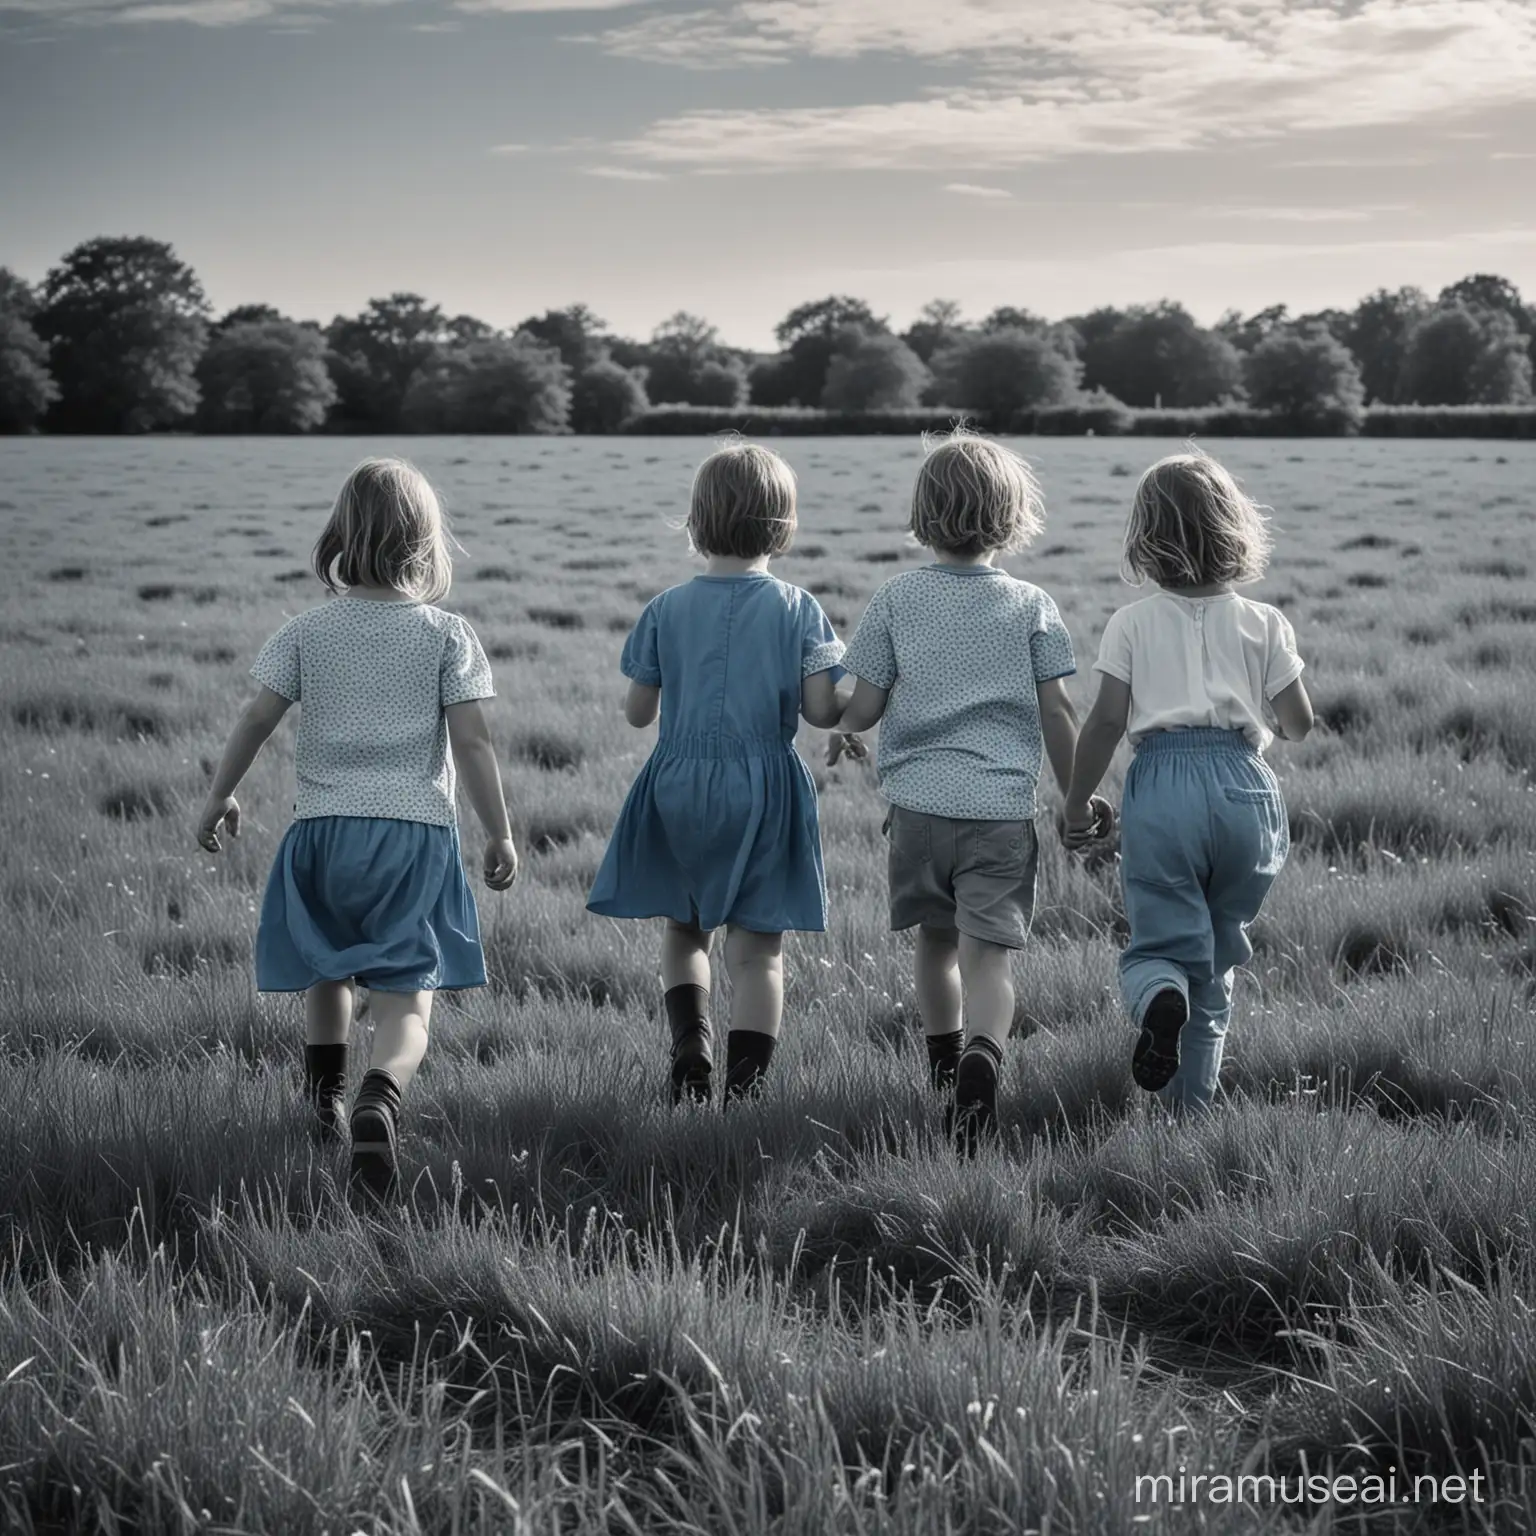 a picture showing the back of four children playing in a field in blue tone